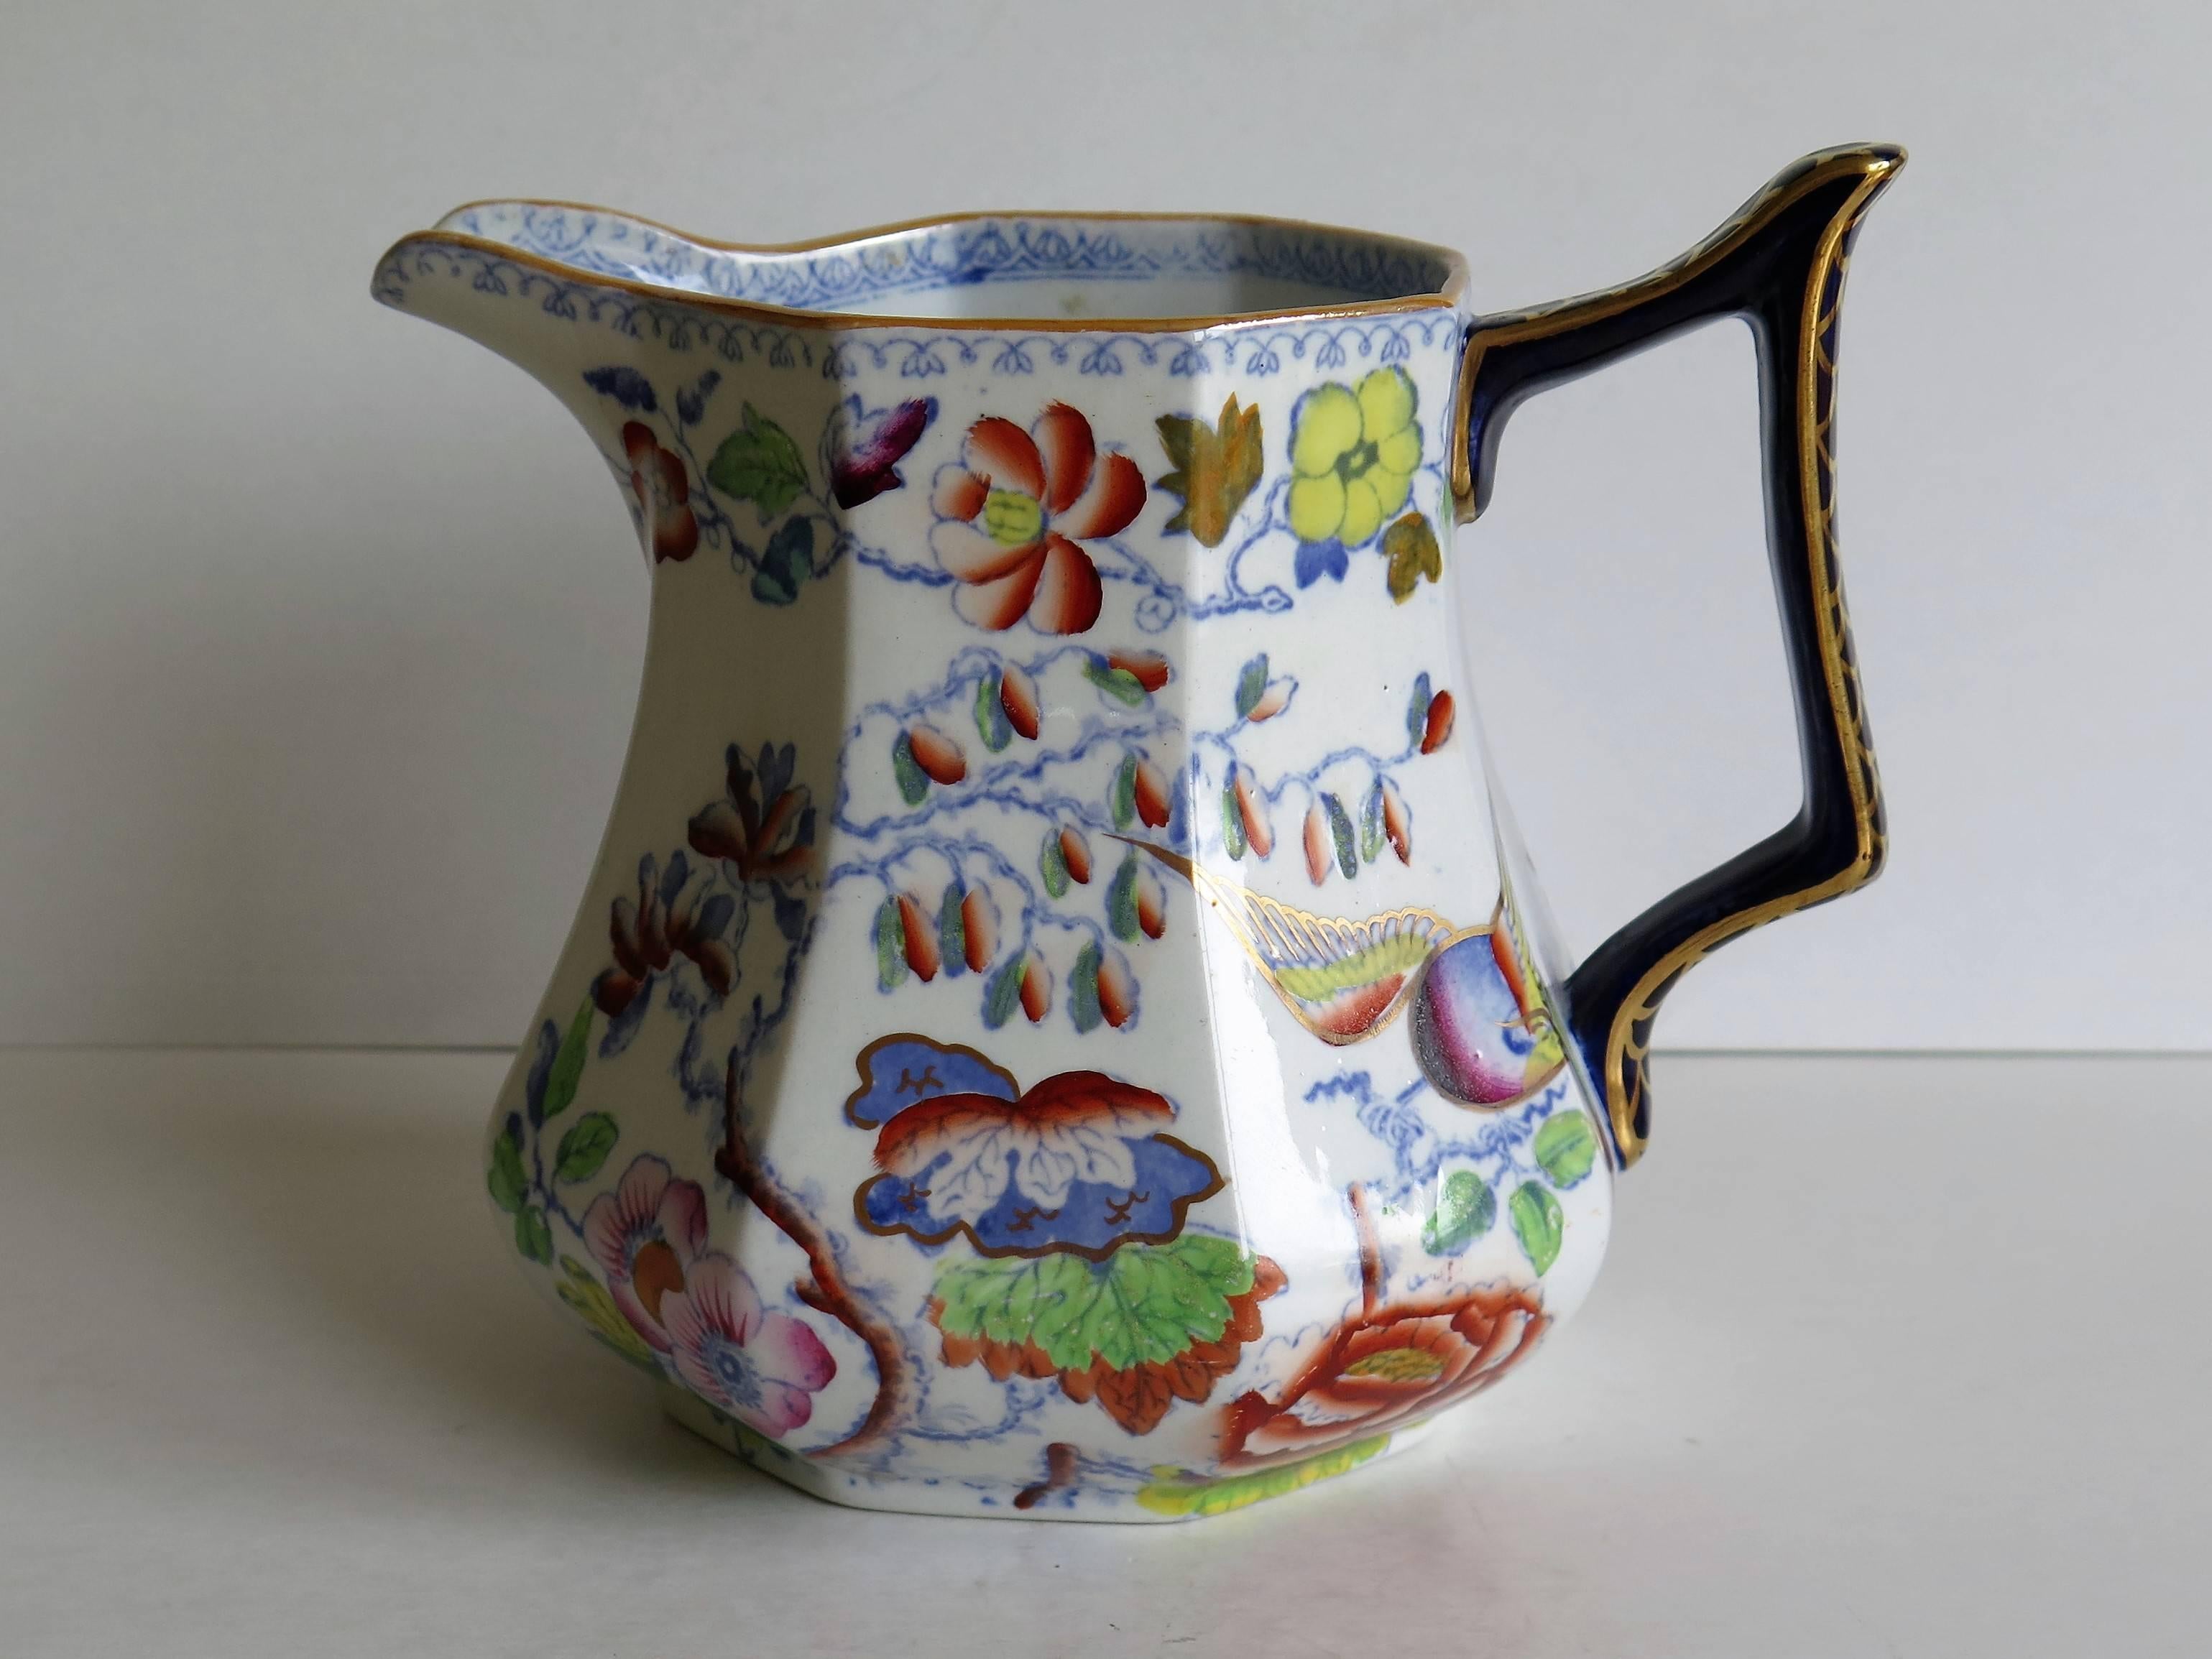 This is a very good mid size jug or pitcher by Mason's Ironstone, England, circa 1870.

The jug has an octagonal form in a shape that is not often seen and with an angular loop handle. 

This jug has one of the very decorative oriental,